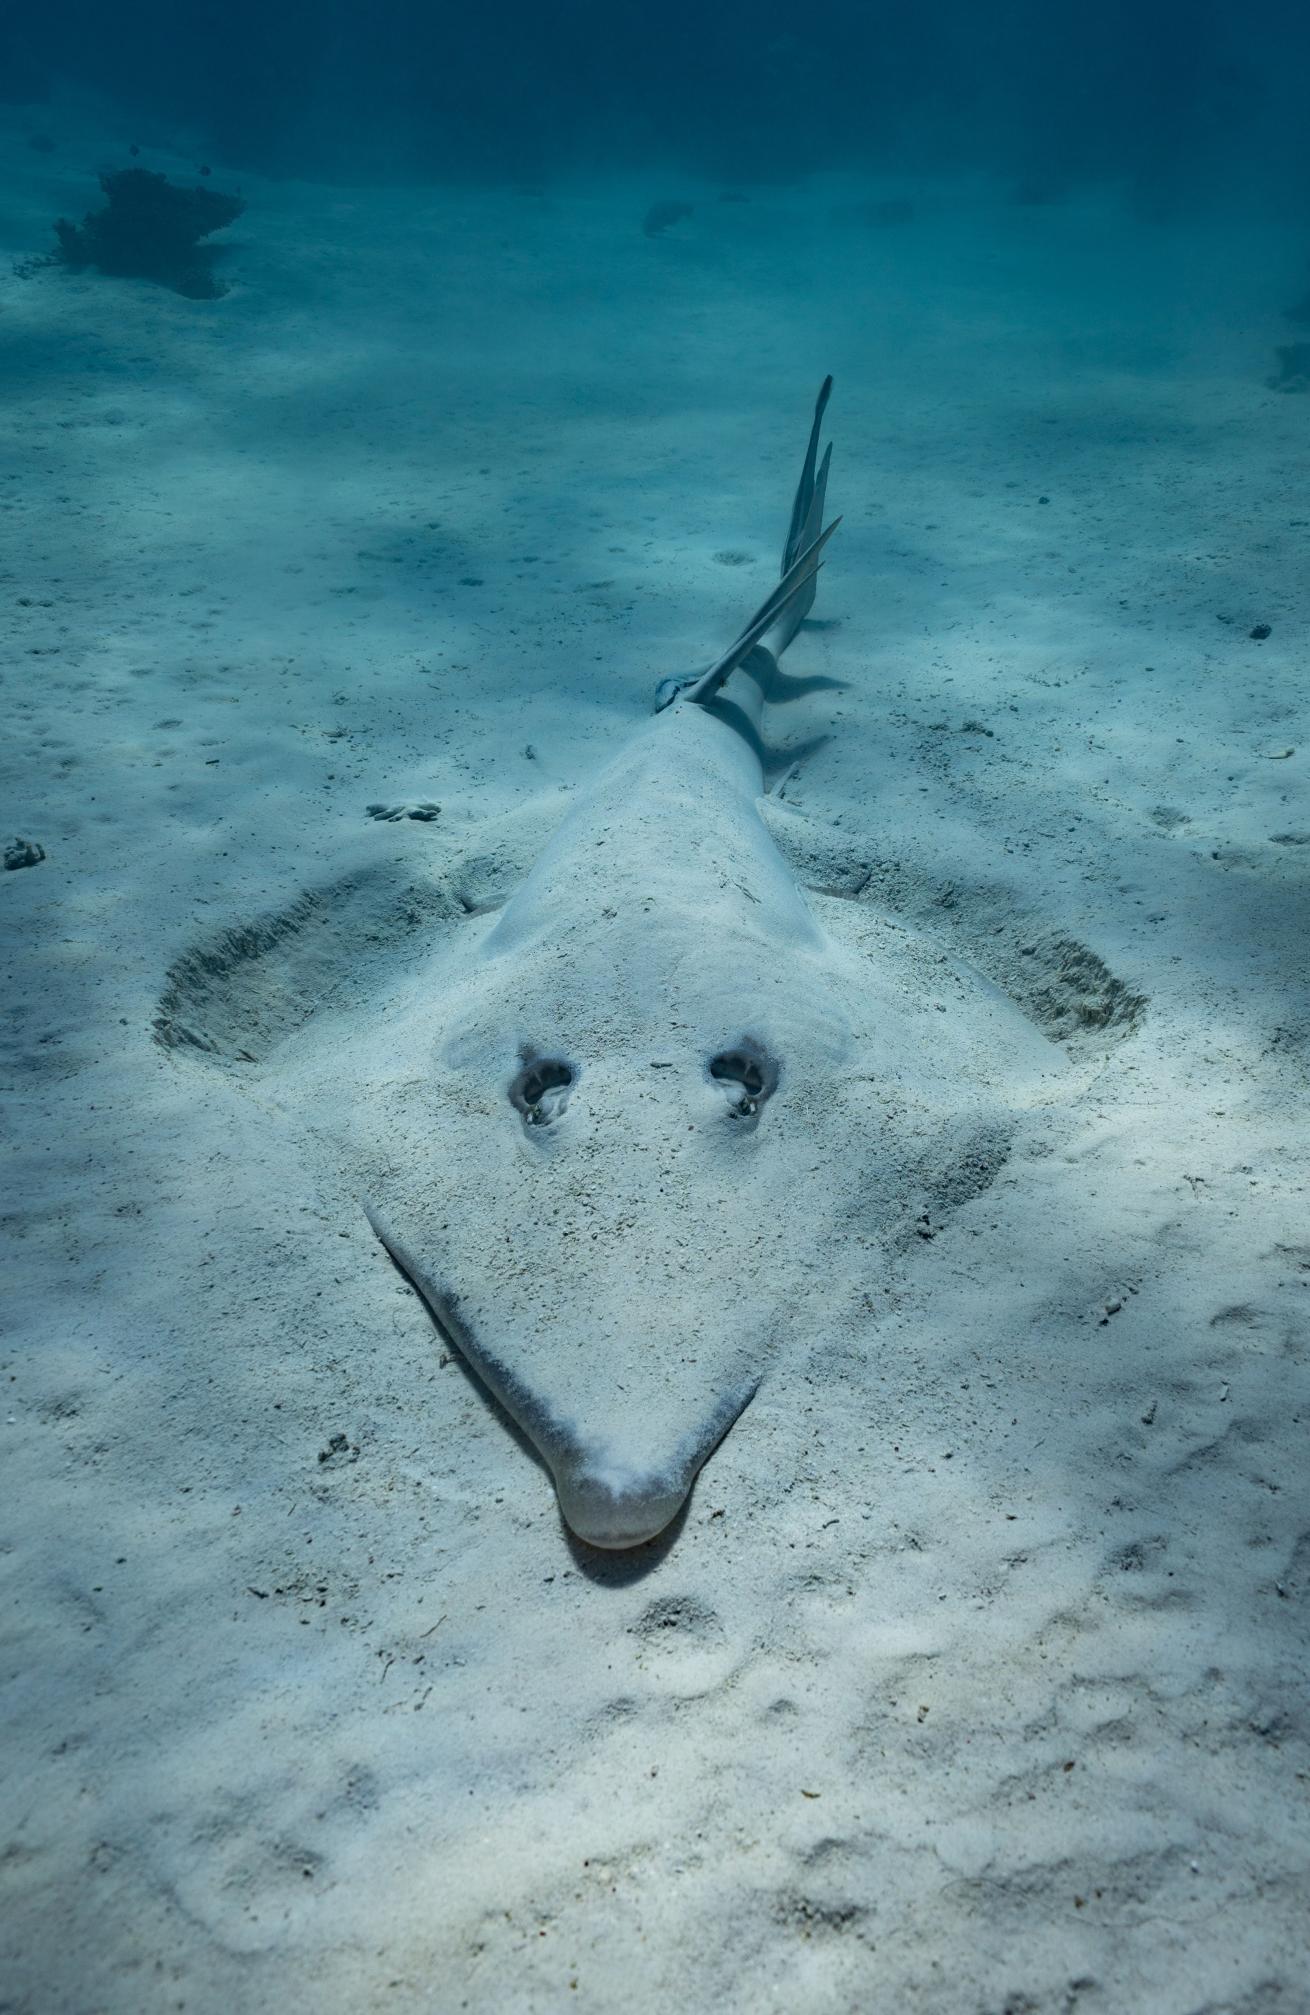 A shovelnose guitarfish buries itself in the sand along Ningaloo Reef
